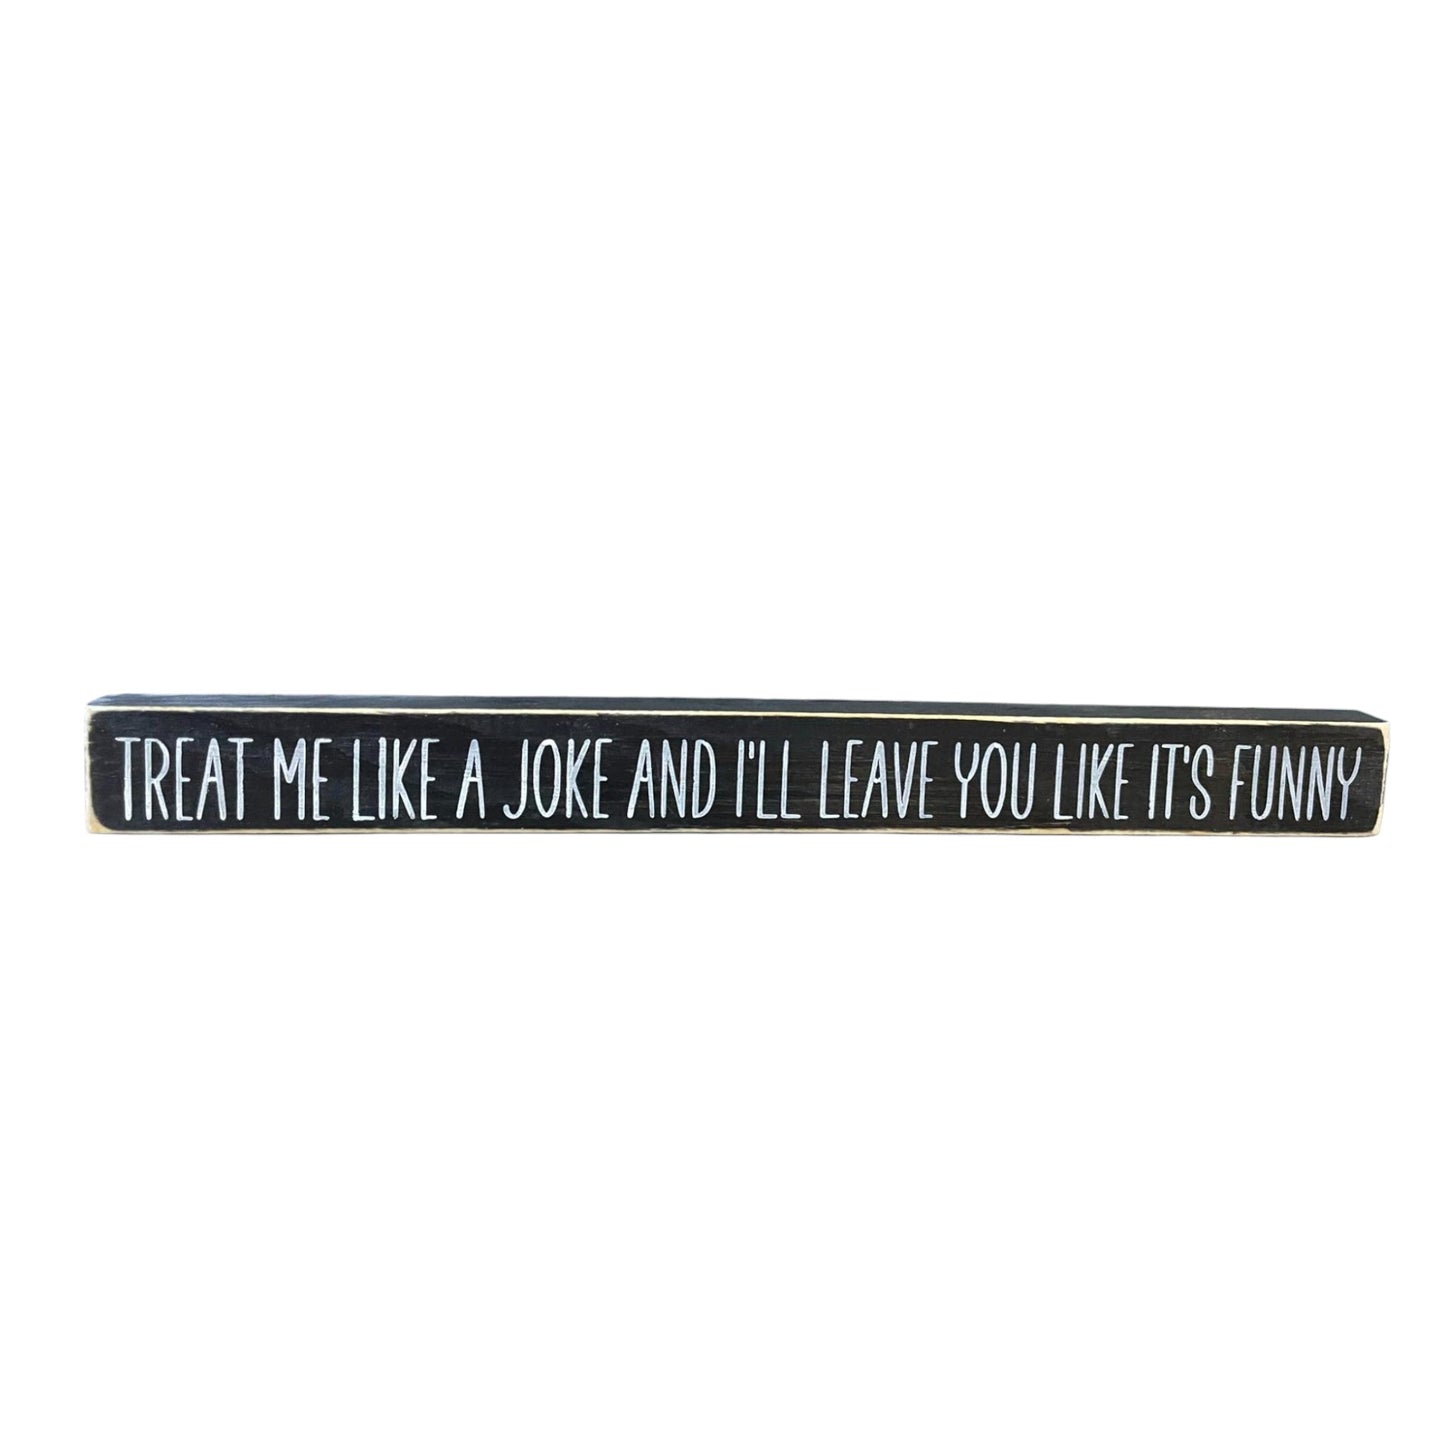 Handpainted black wood sign with white text reading 'Treat Me Like A Joke And I Will Leave You Like It's Funny,' freestanding 16-inch empowering decor for strong independent females.